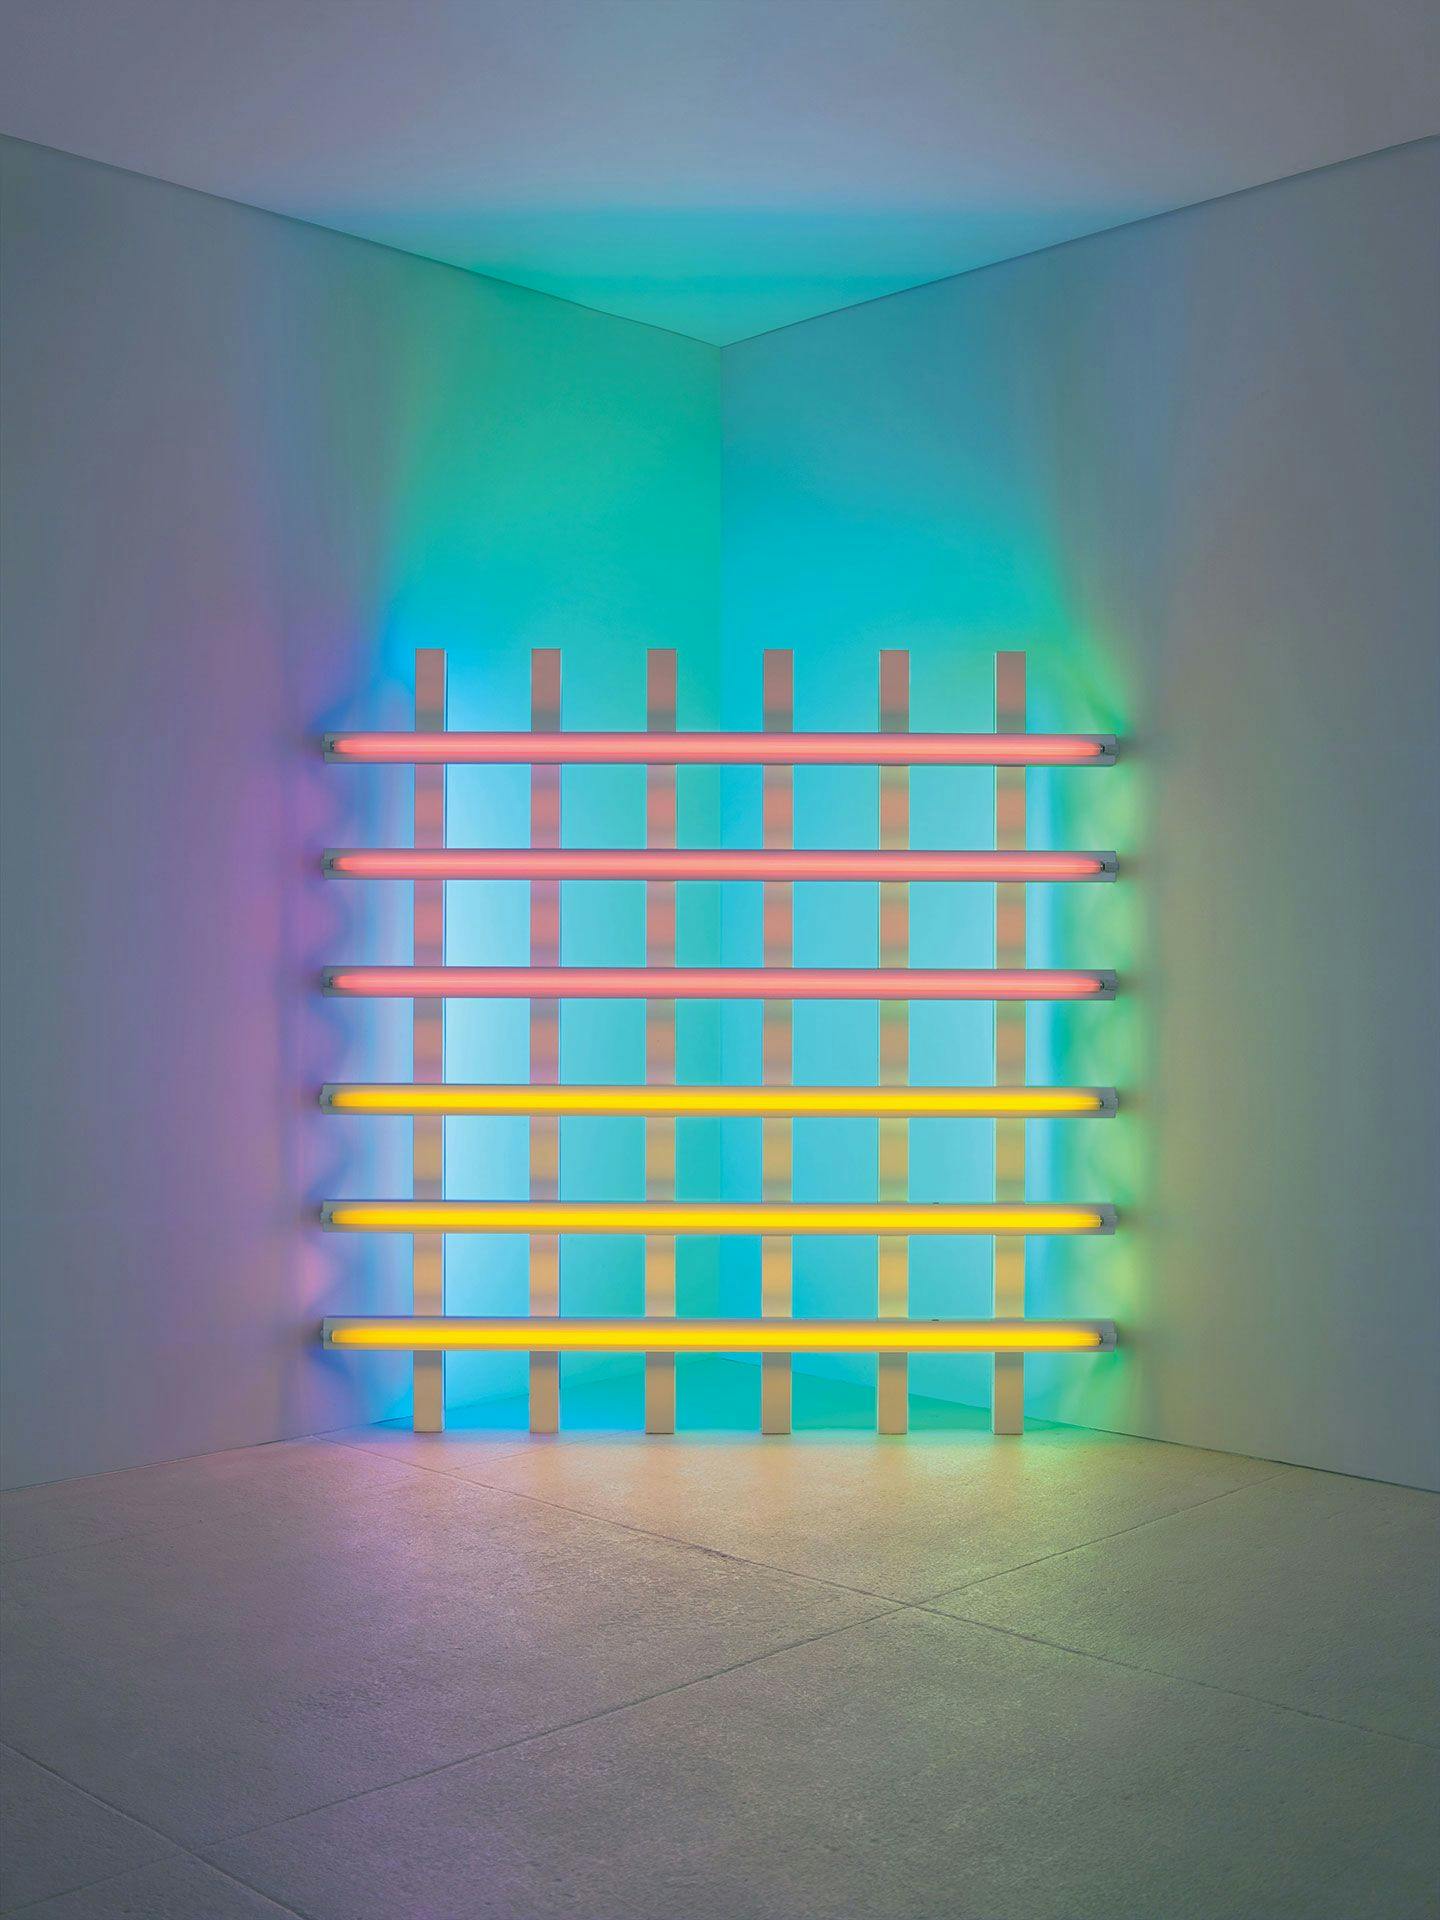 A corner sculpture in pink, yellow, blue, and green fluorescent light by Dan Flavin, titled untitled (in honor of Harold Joachim) 3, dated 1977.